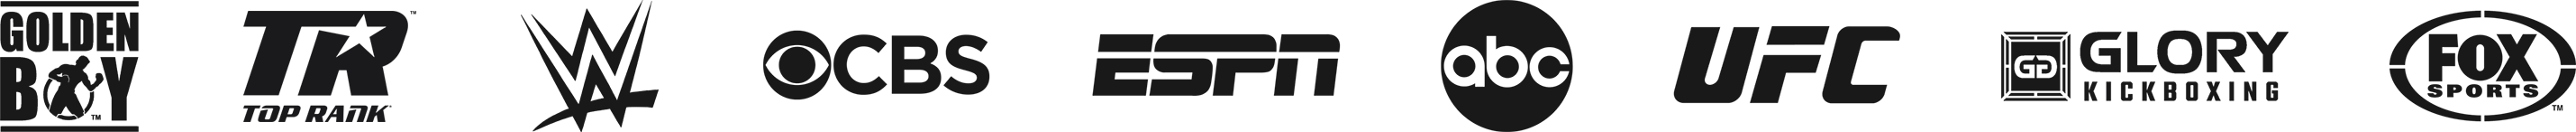 Television Sports Networks